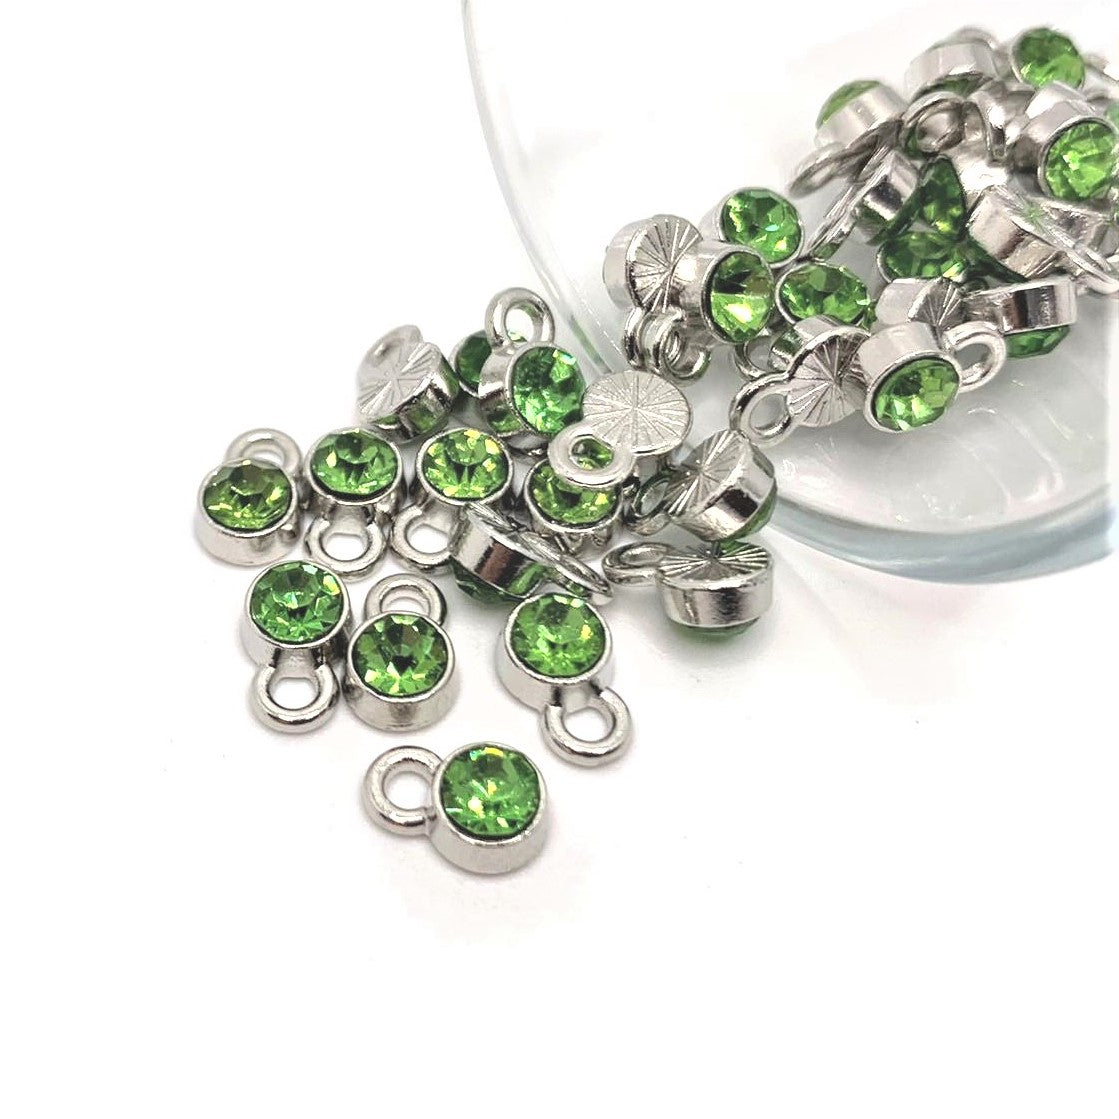 4, 20 or 50 Pieces: Small Light Green August Birthstone Rhinestone Charms